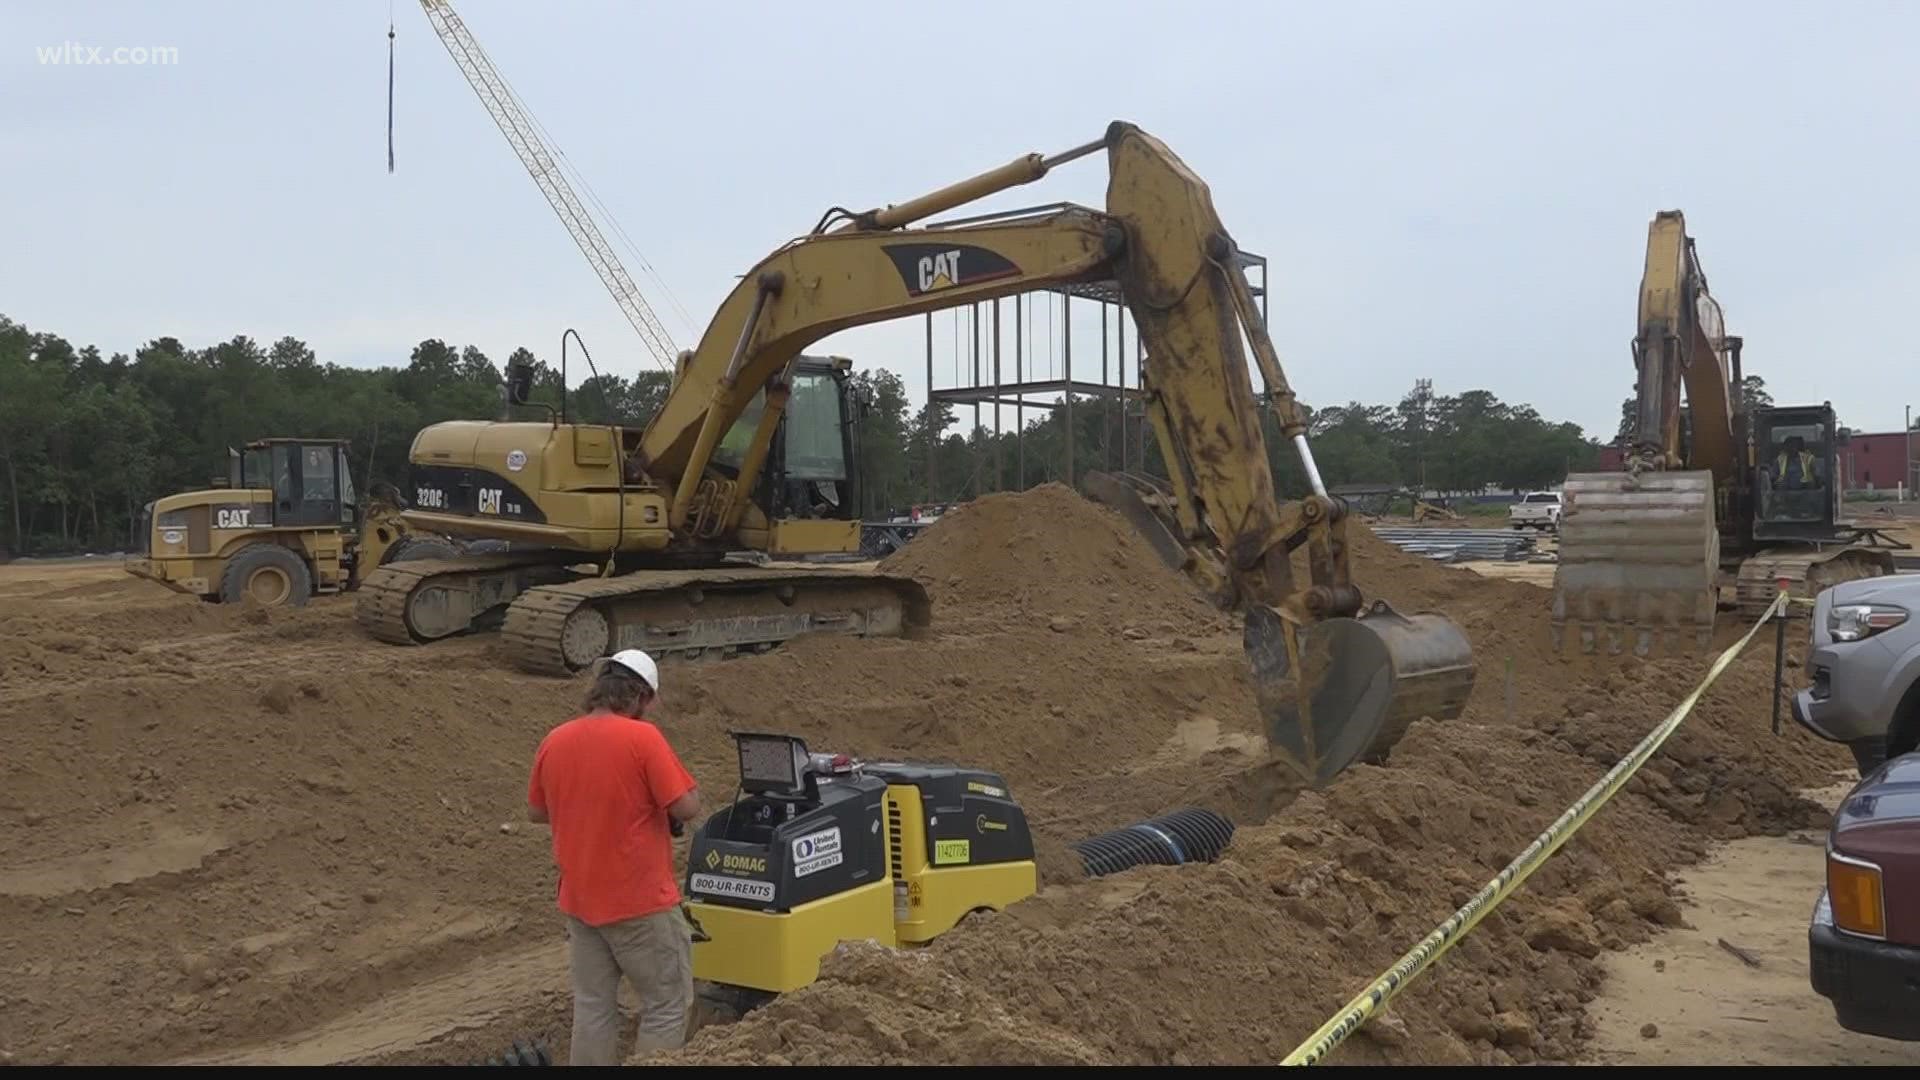 A new performing arts center is under construction for Lexington County School District Two, thanks to the Lexington Two bond referendum.